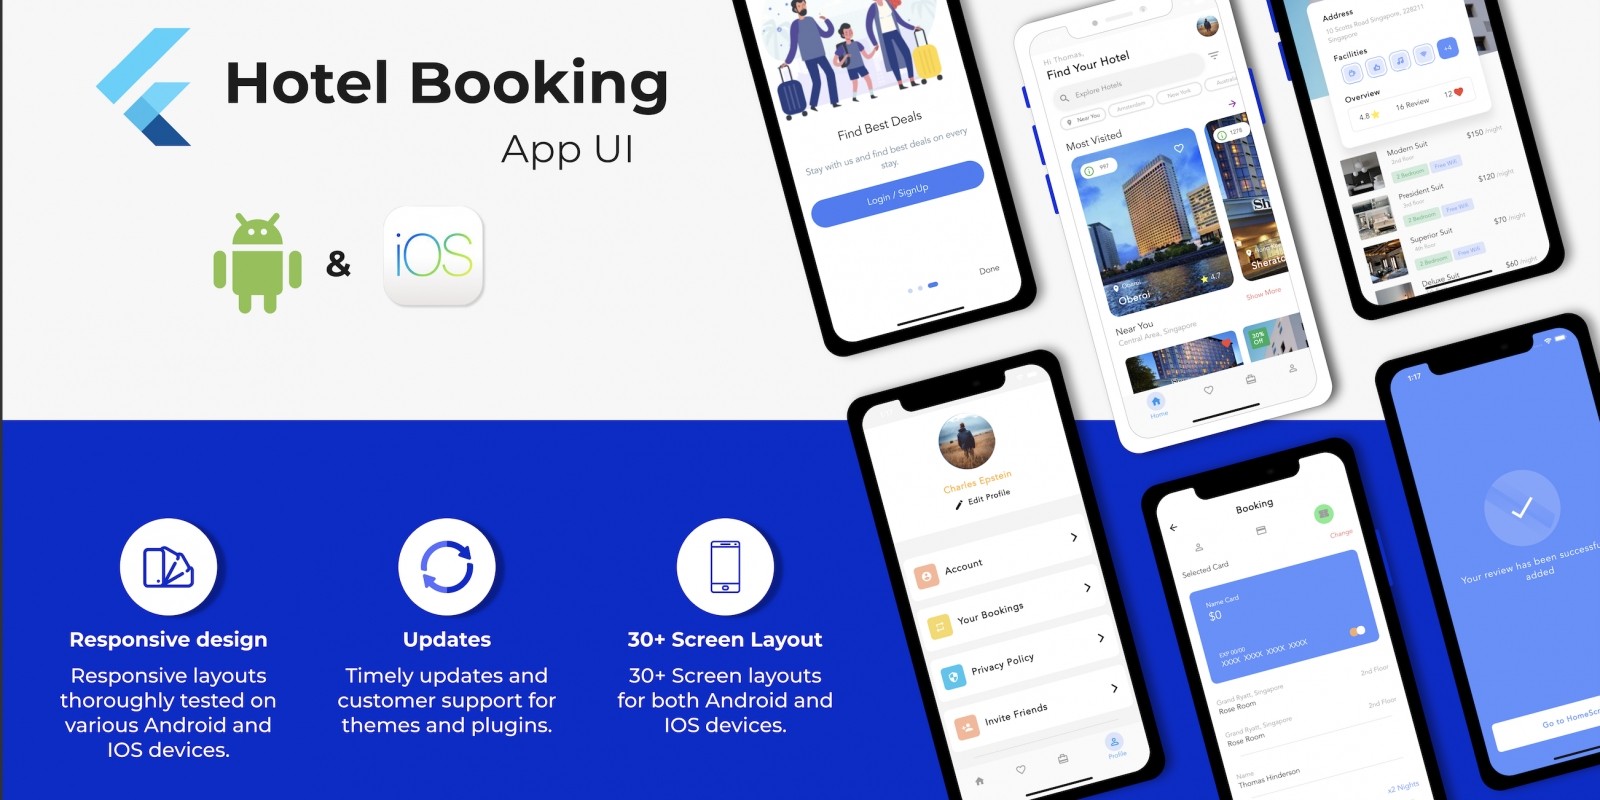 Hotel Booking Travel App UI Template With Flutter by Srineesh | Codester